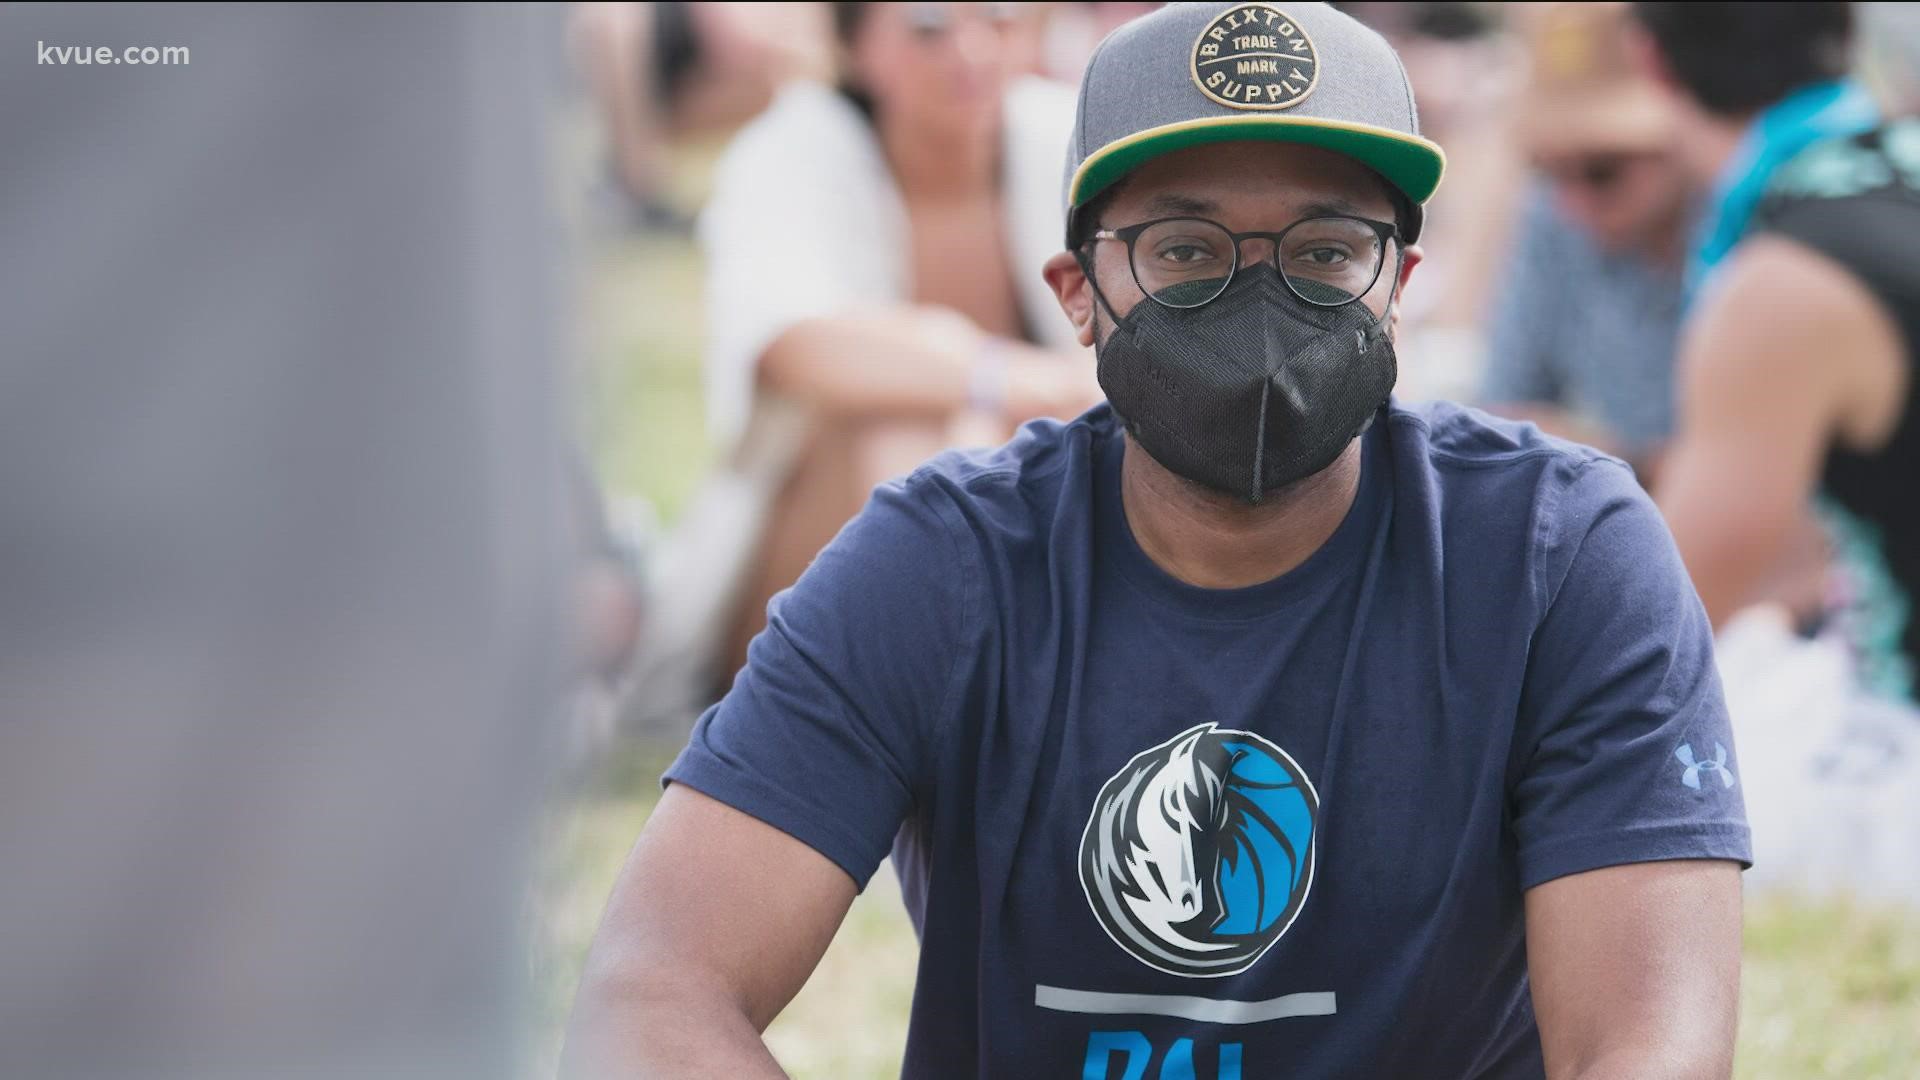 City leaders are trying to get more people to wear masks during Weekend 2 of the Austin City Limits Music Festival.